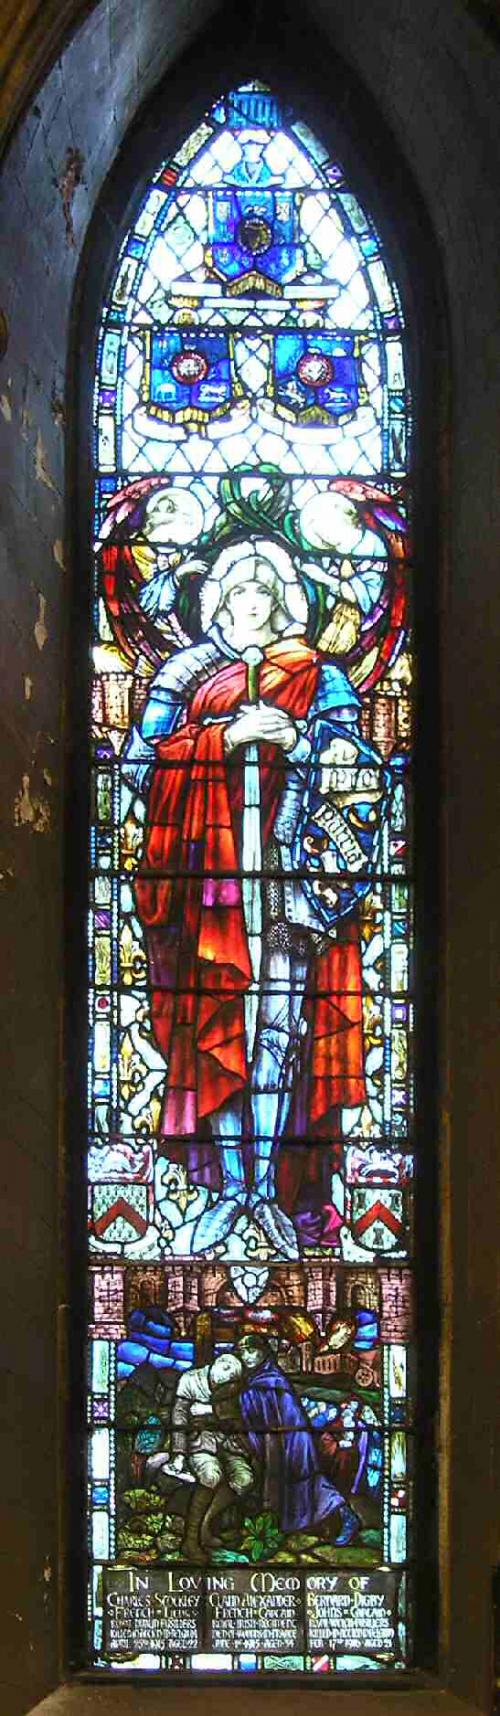 French and Johns Memorial Window